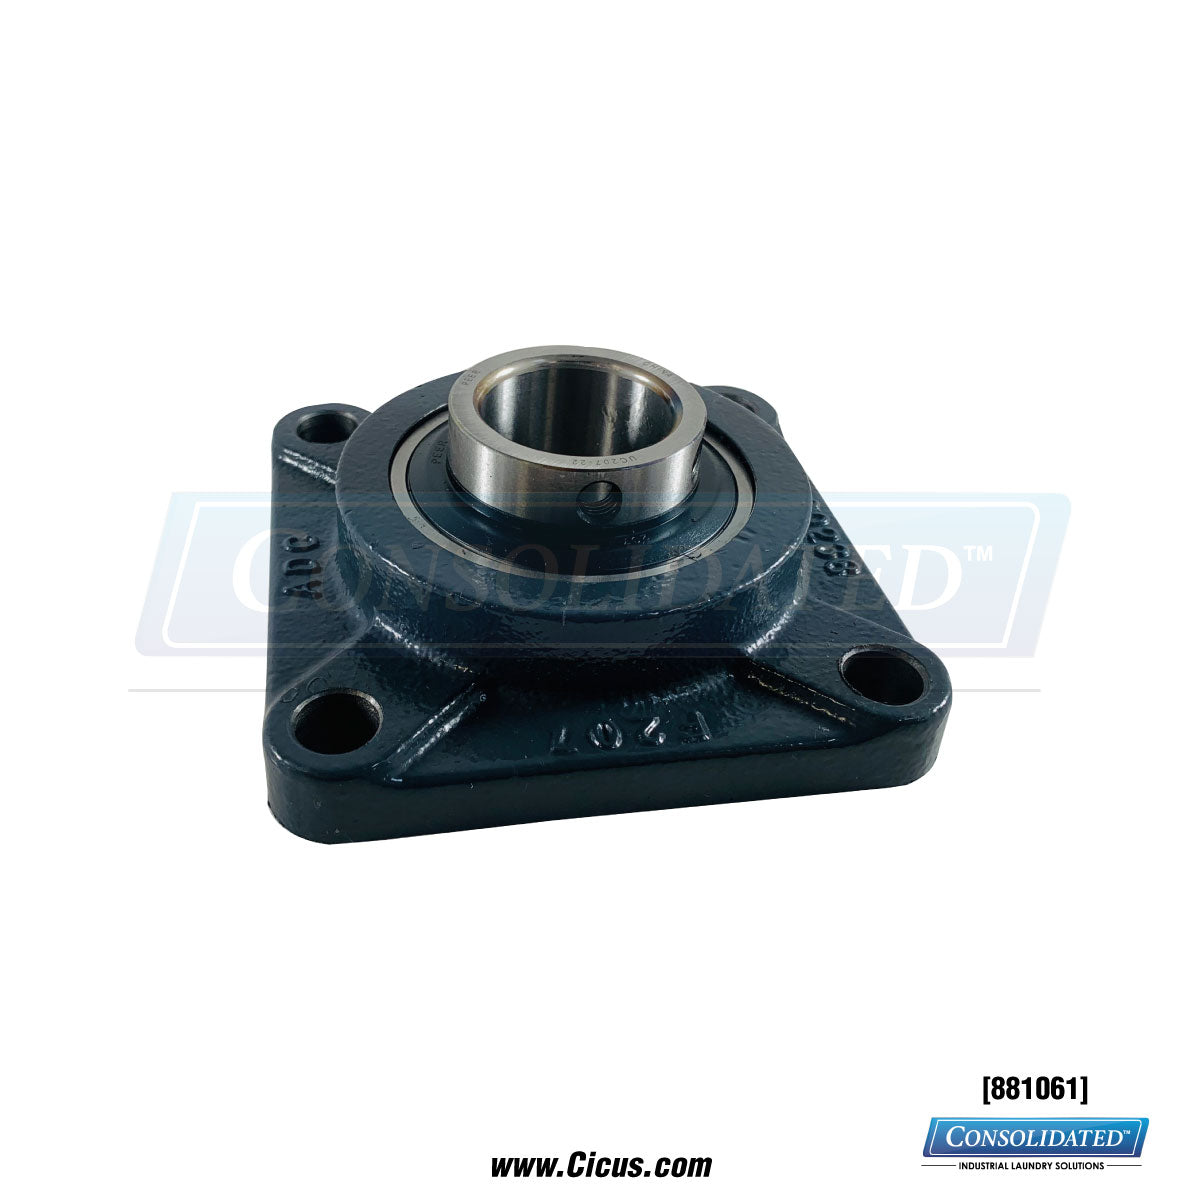 ADC 1-3/8" Flange Bearing w/ Set Screw [881061] - Front View